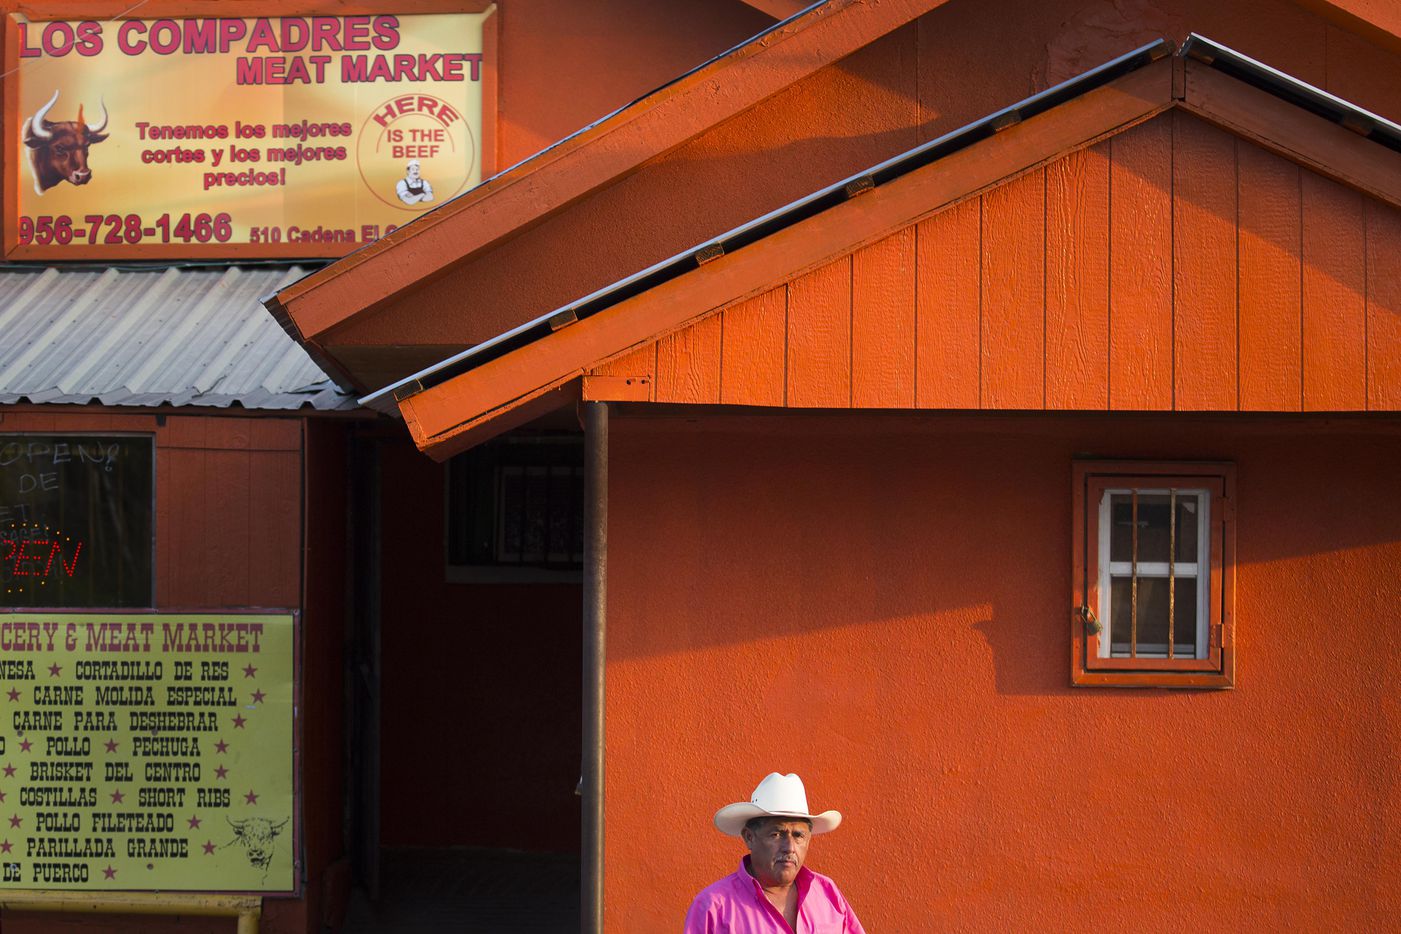 A man walks out of Los Compadres Meat Market on May 10, 2017, in El Cenizo, Texas.